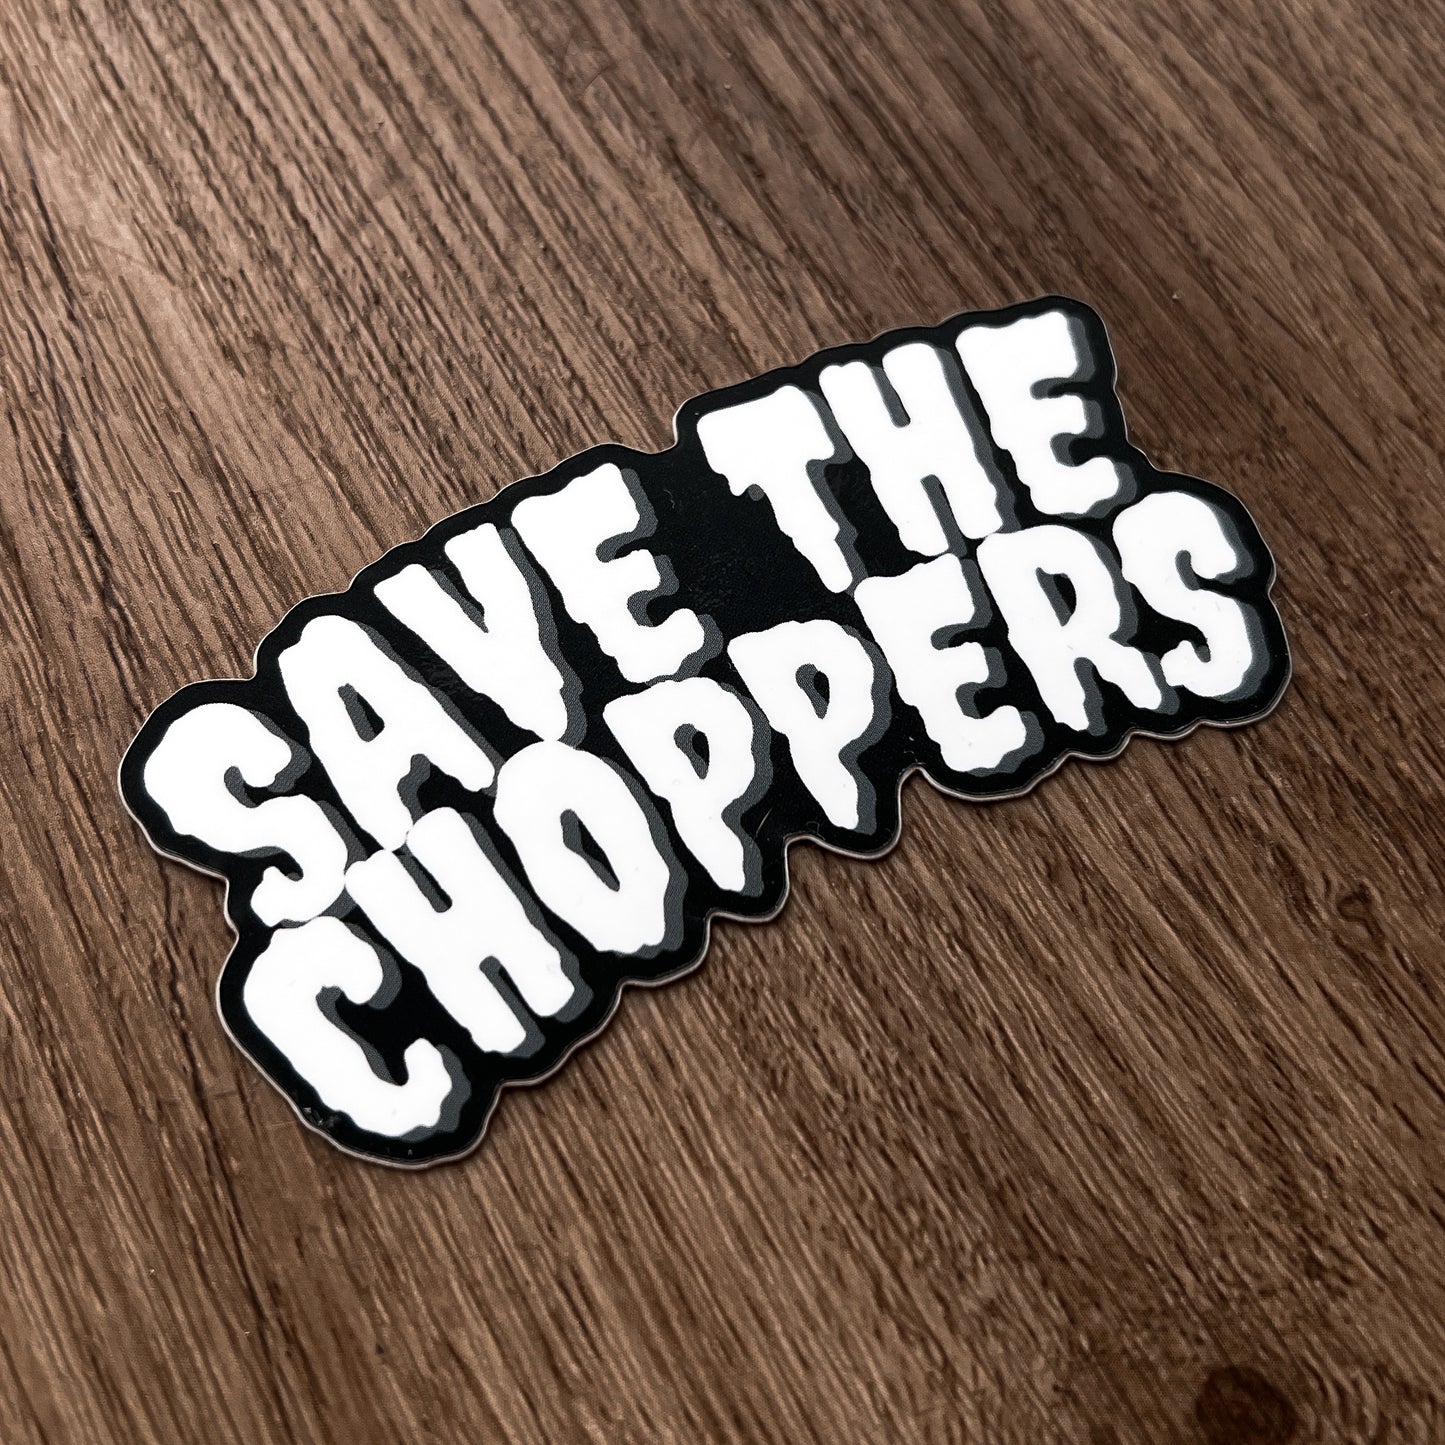 Save The Choppers Sticker